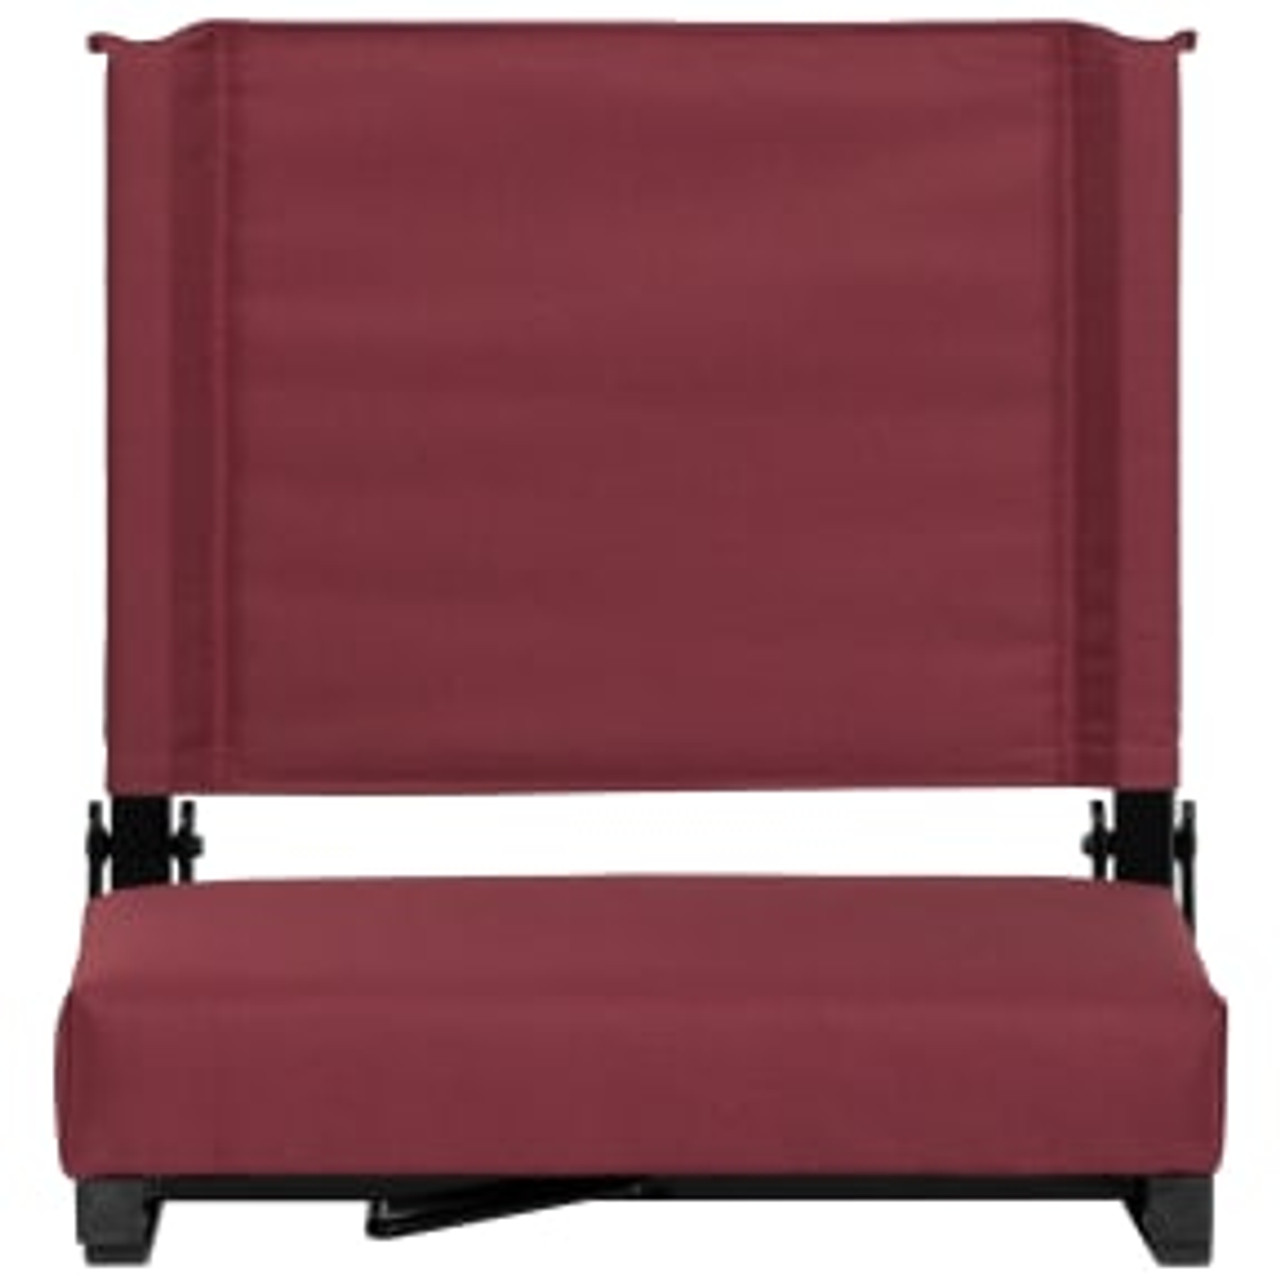 Set of 2 Grandstand Comfort Seats by Flash - Lightweight Stadium Chair with Handle & Ultra-Padded Seat, Maroon